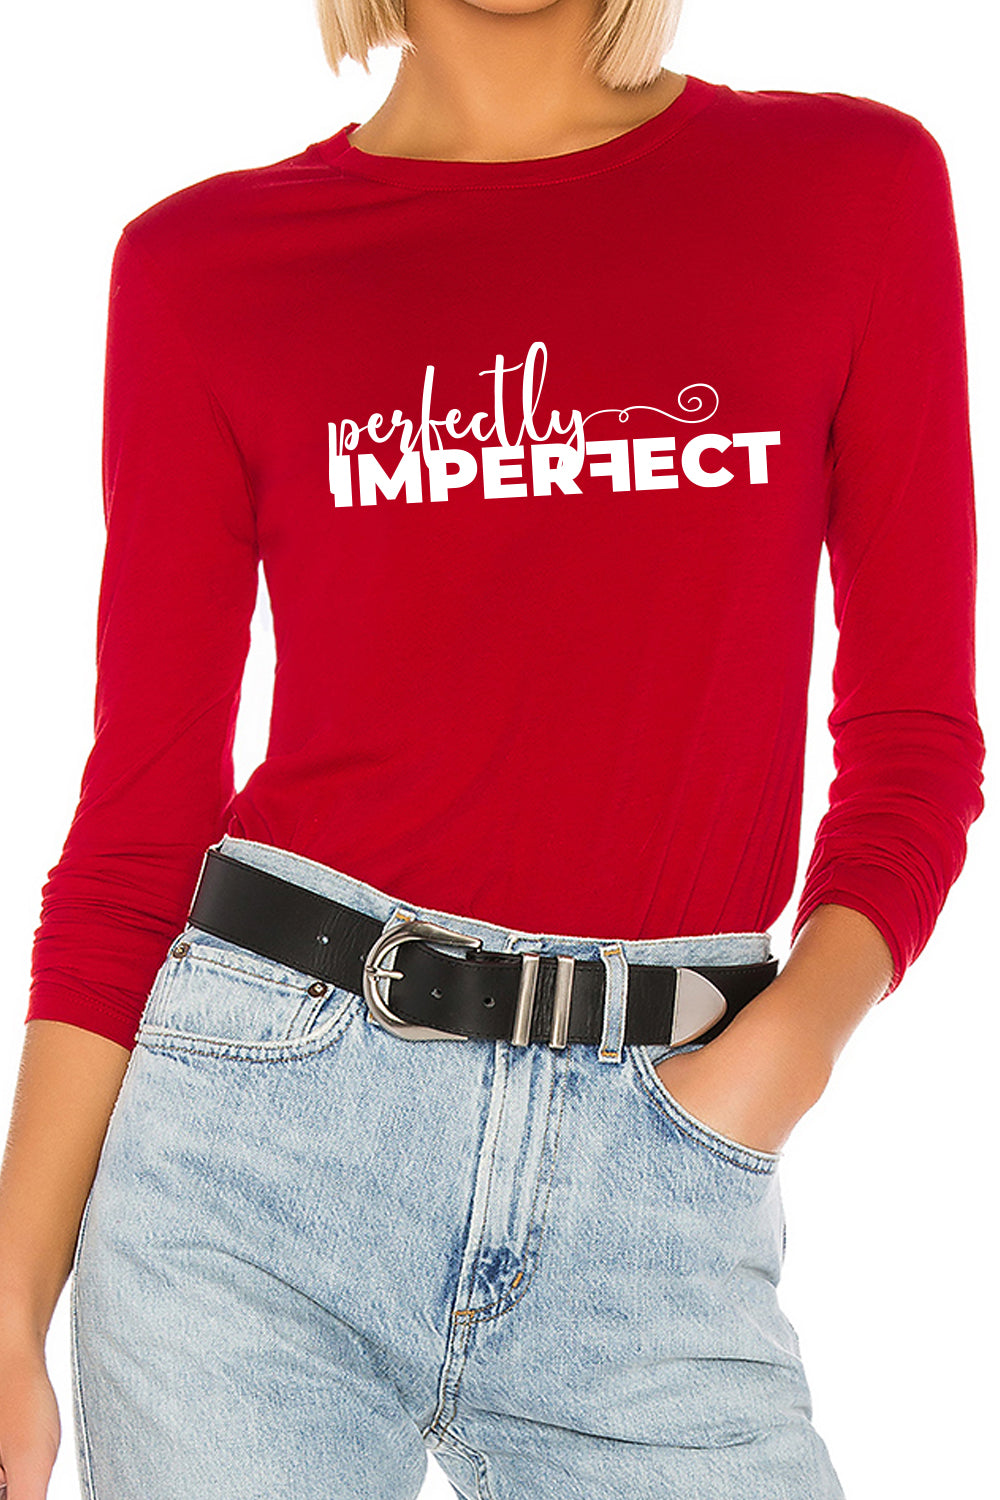 Perfectly Imperfect Buddie Red Top